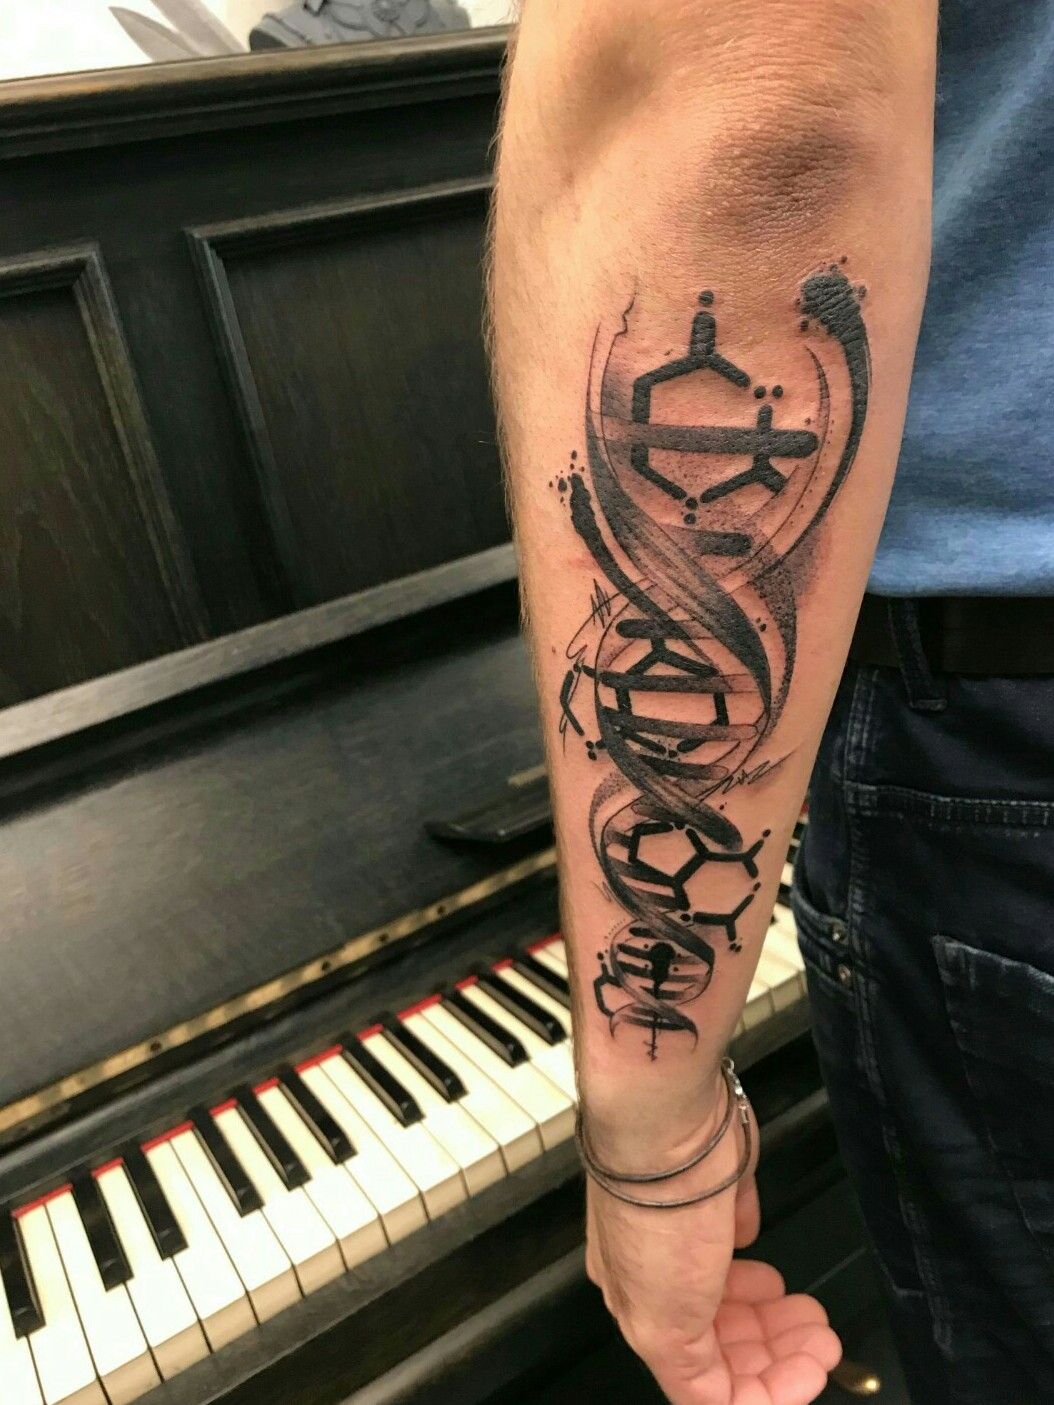 Top more than 71 dna music tattoo latest  thtantai2